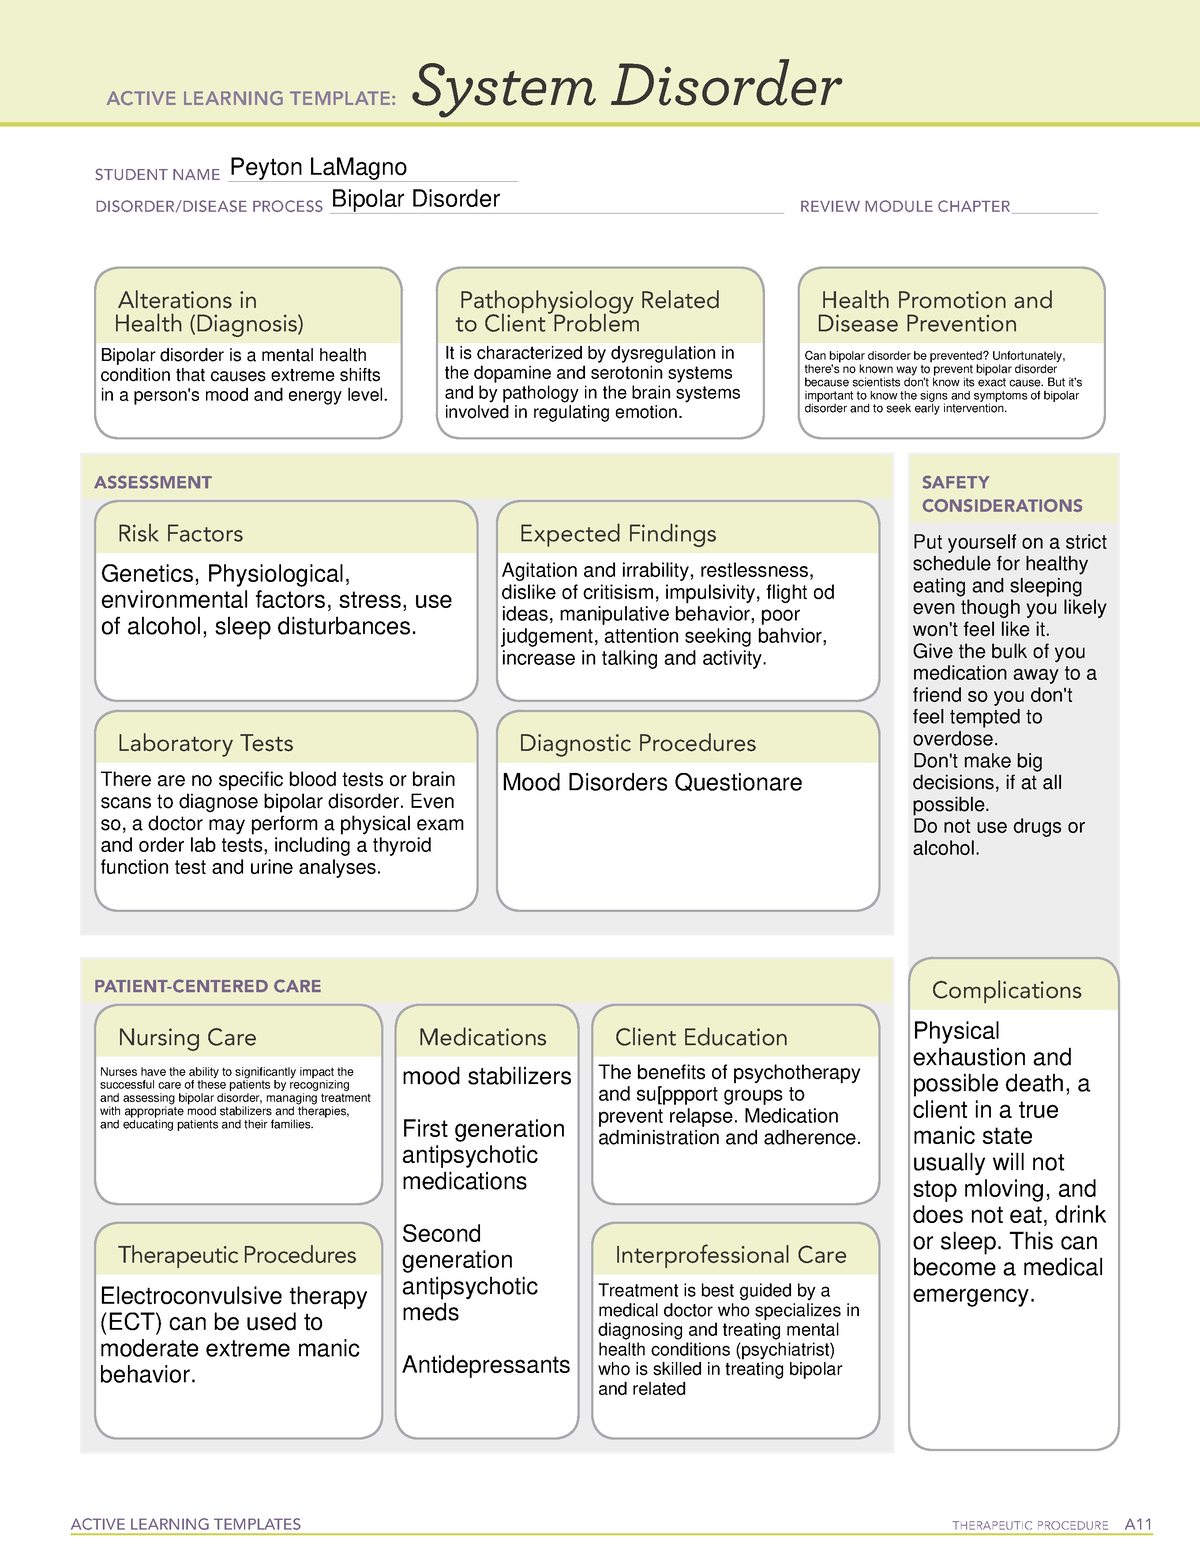 ati-systems-disorder-bipolar-disorder-active-learning-templates